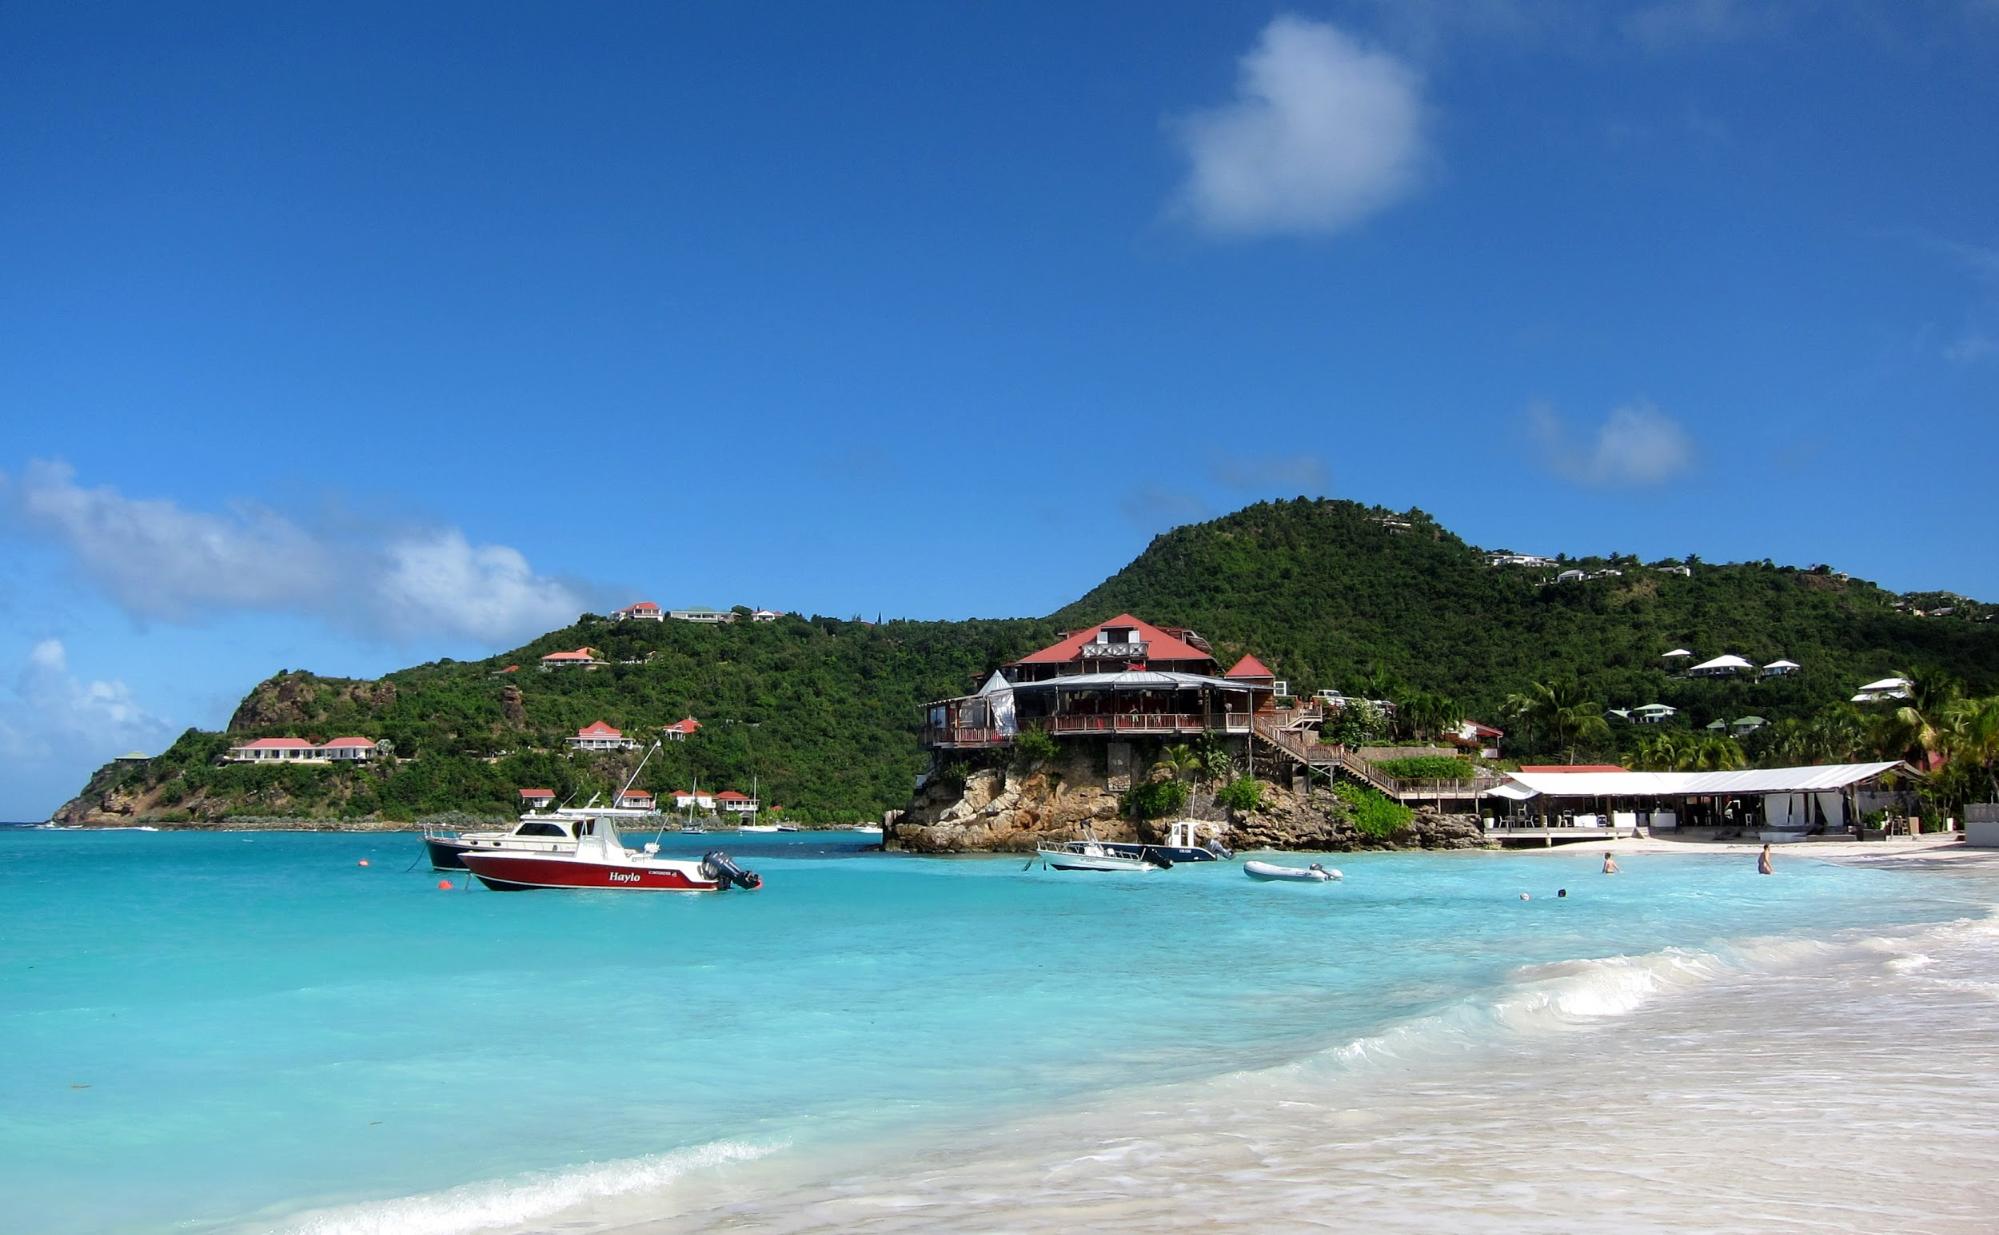 Don't miss Anse de Combier when sailing in St Martin